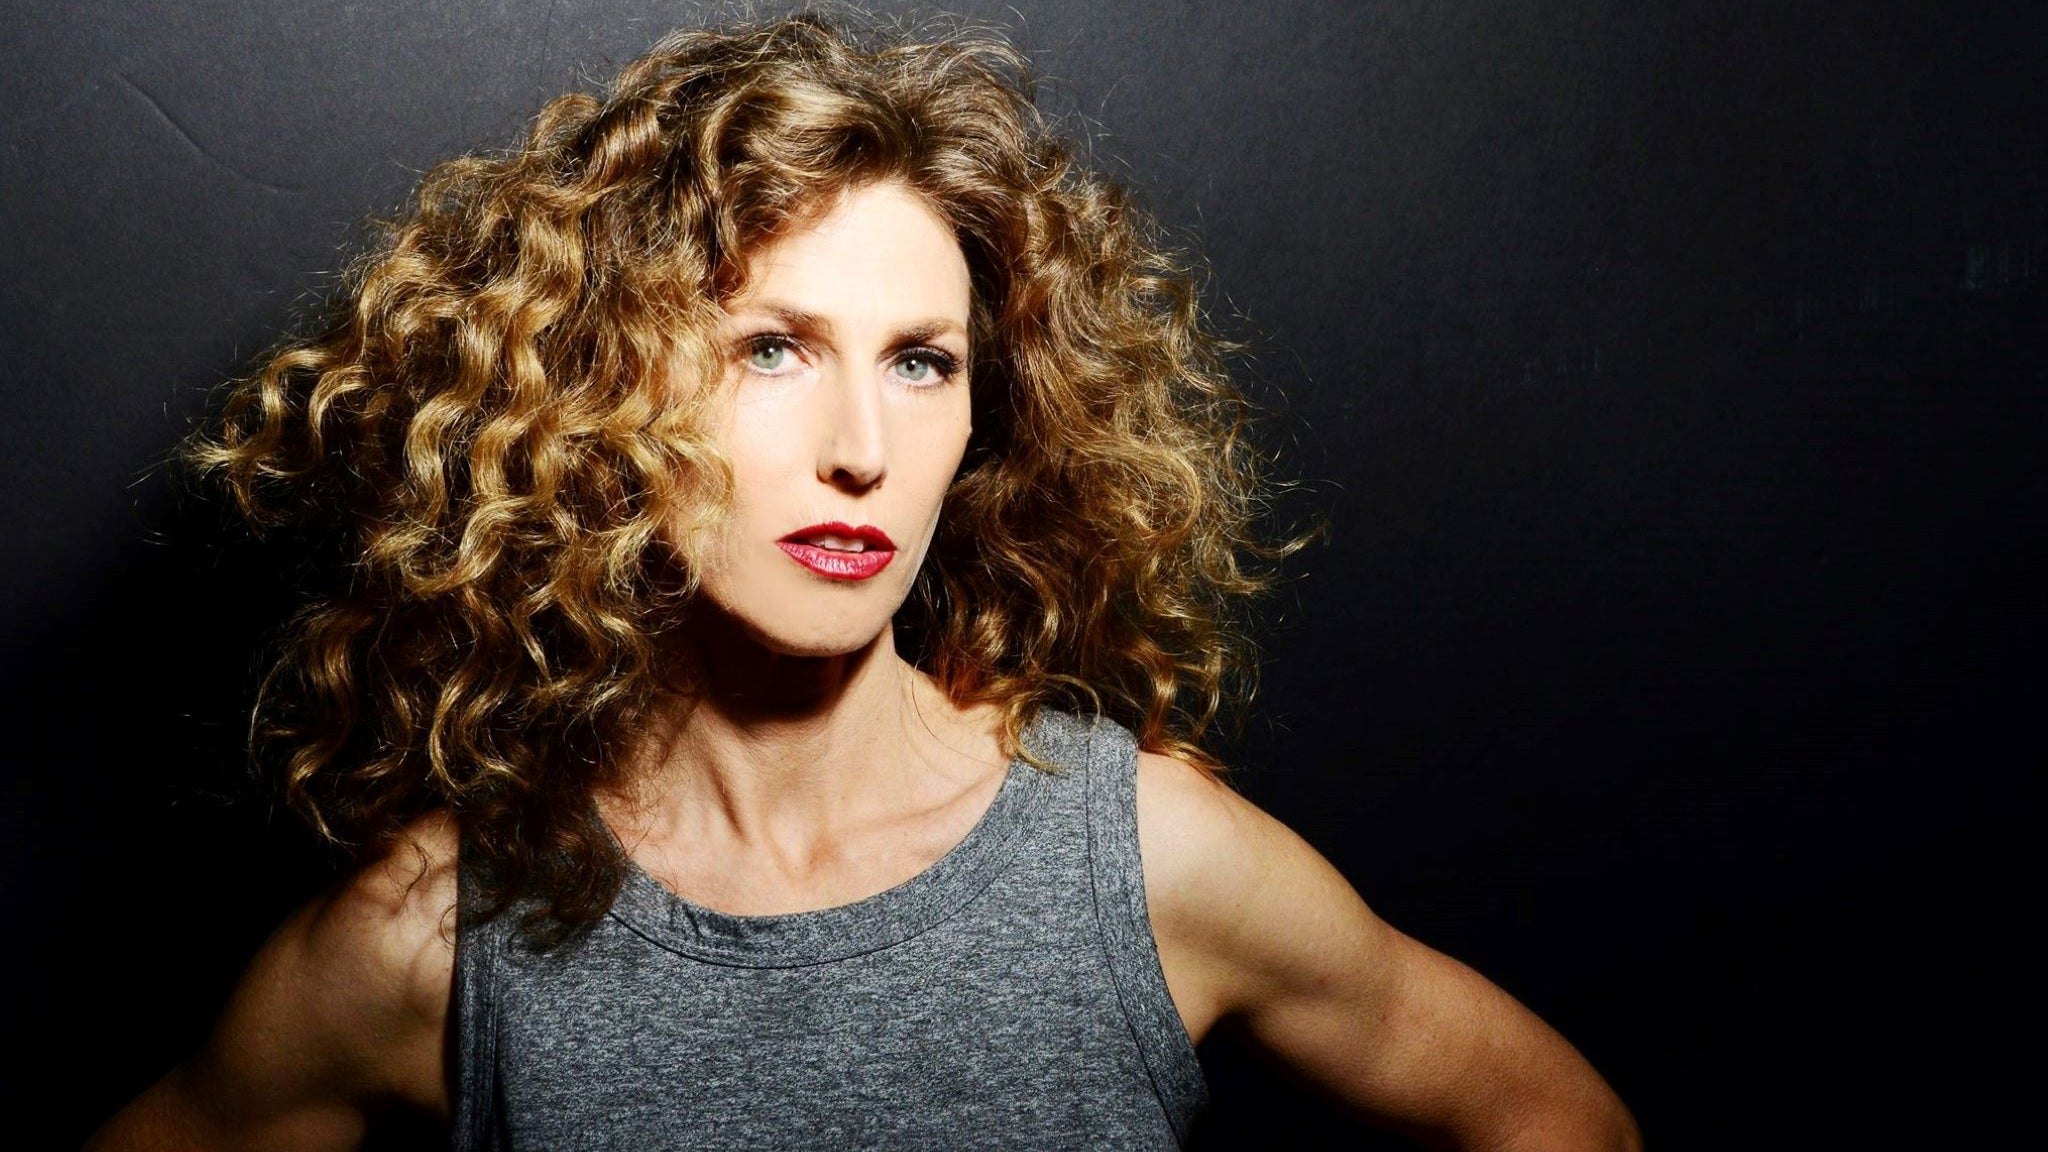 Sophie B. Hawkins in Portsmouth promo photo for Friends Circle presale offer code